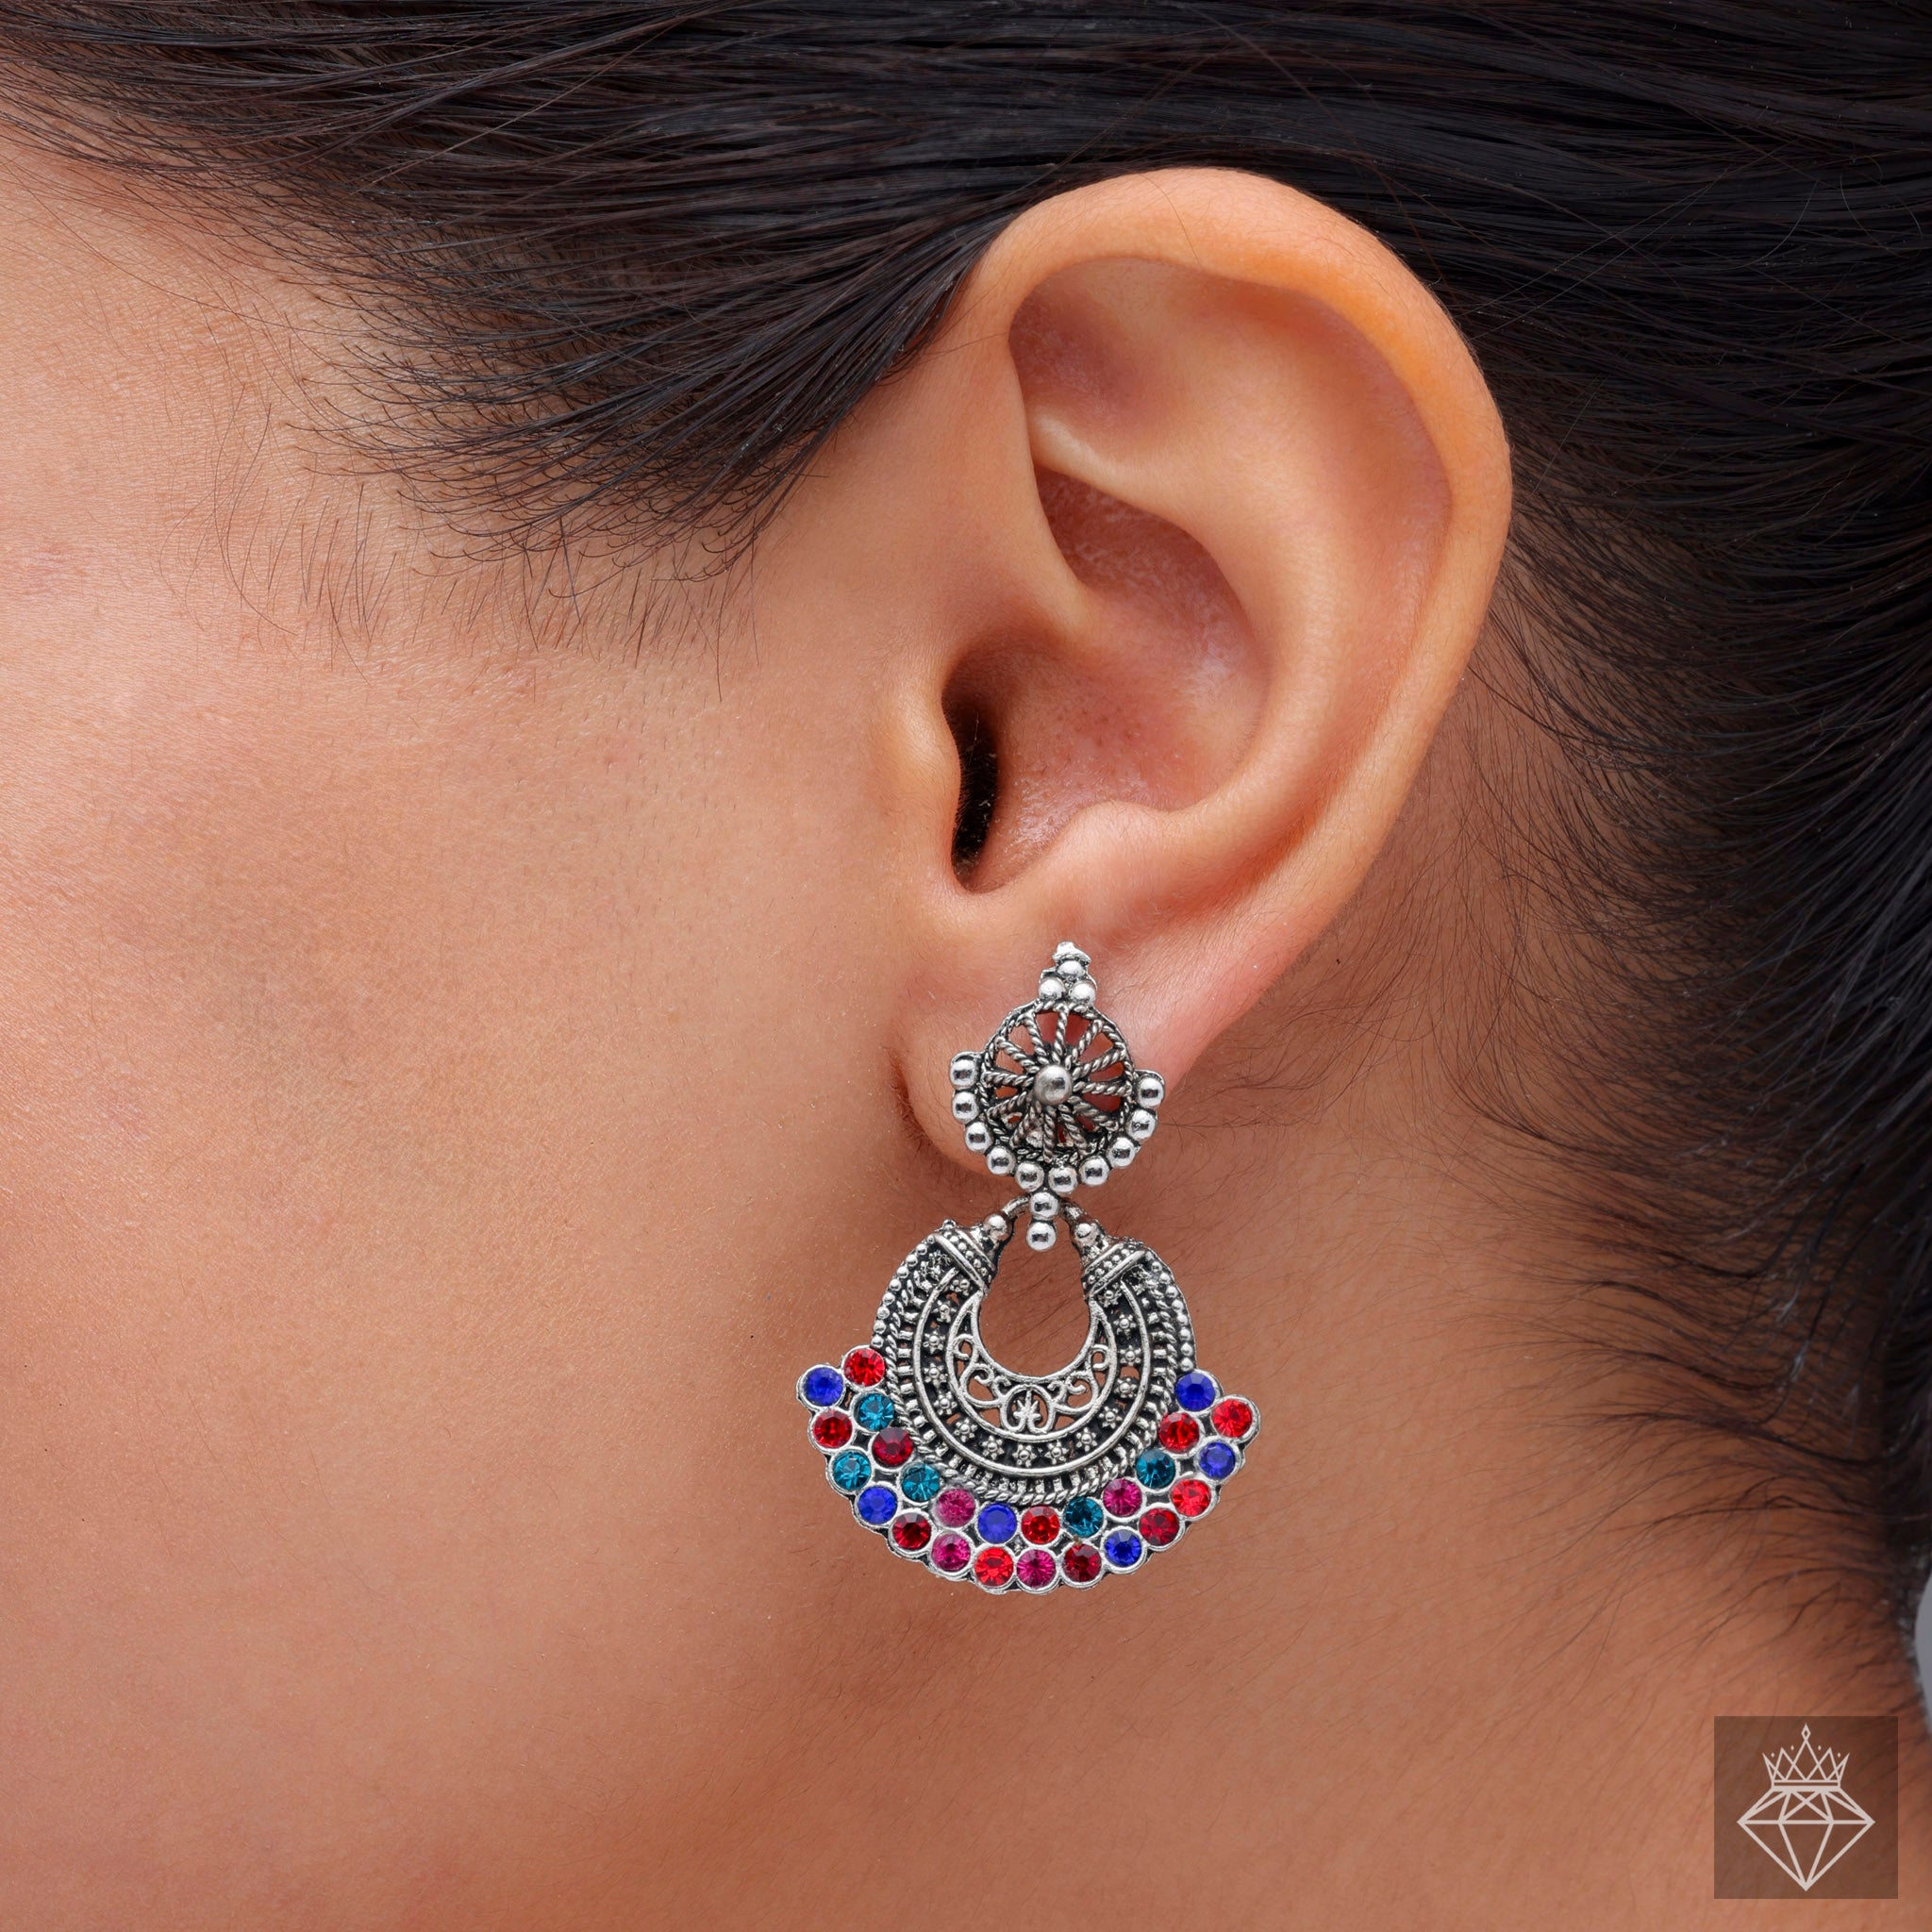 Multihued Ethnic Silver Ear Adornments By PRAO